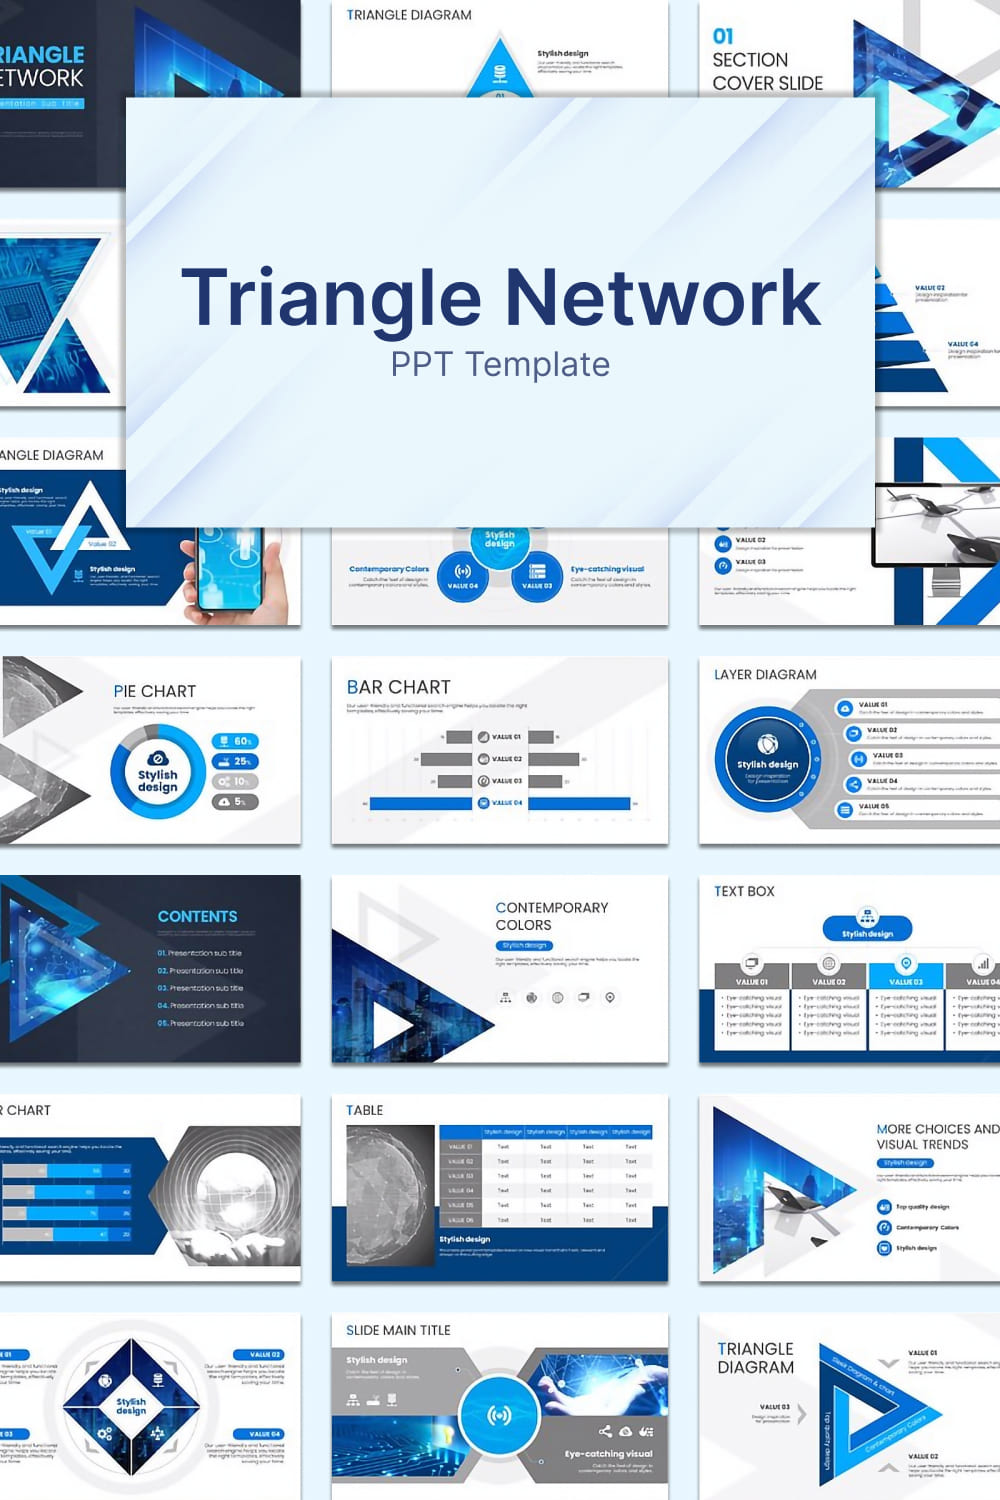 triangle network ppt template 03